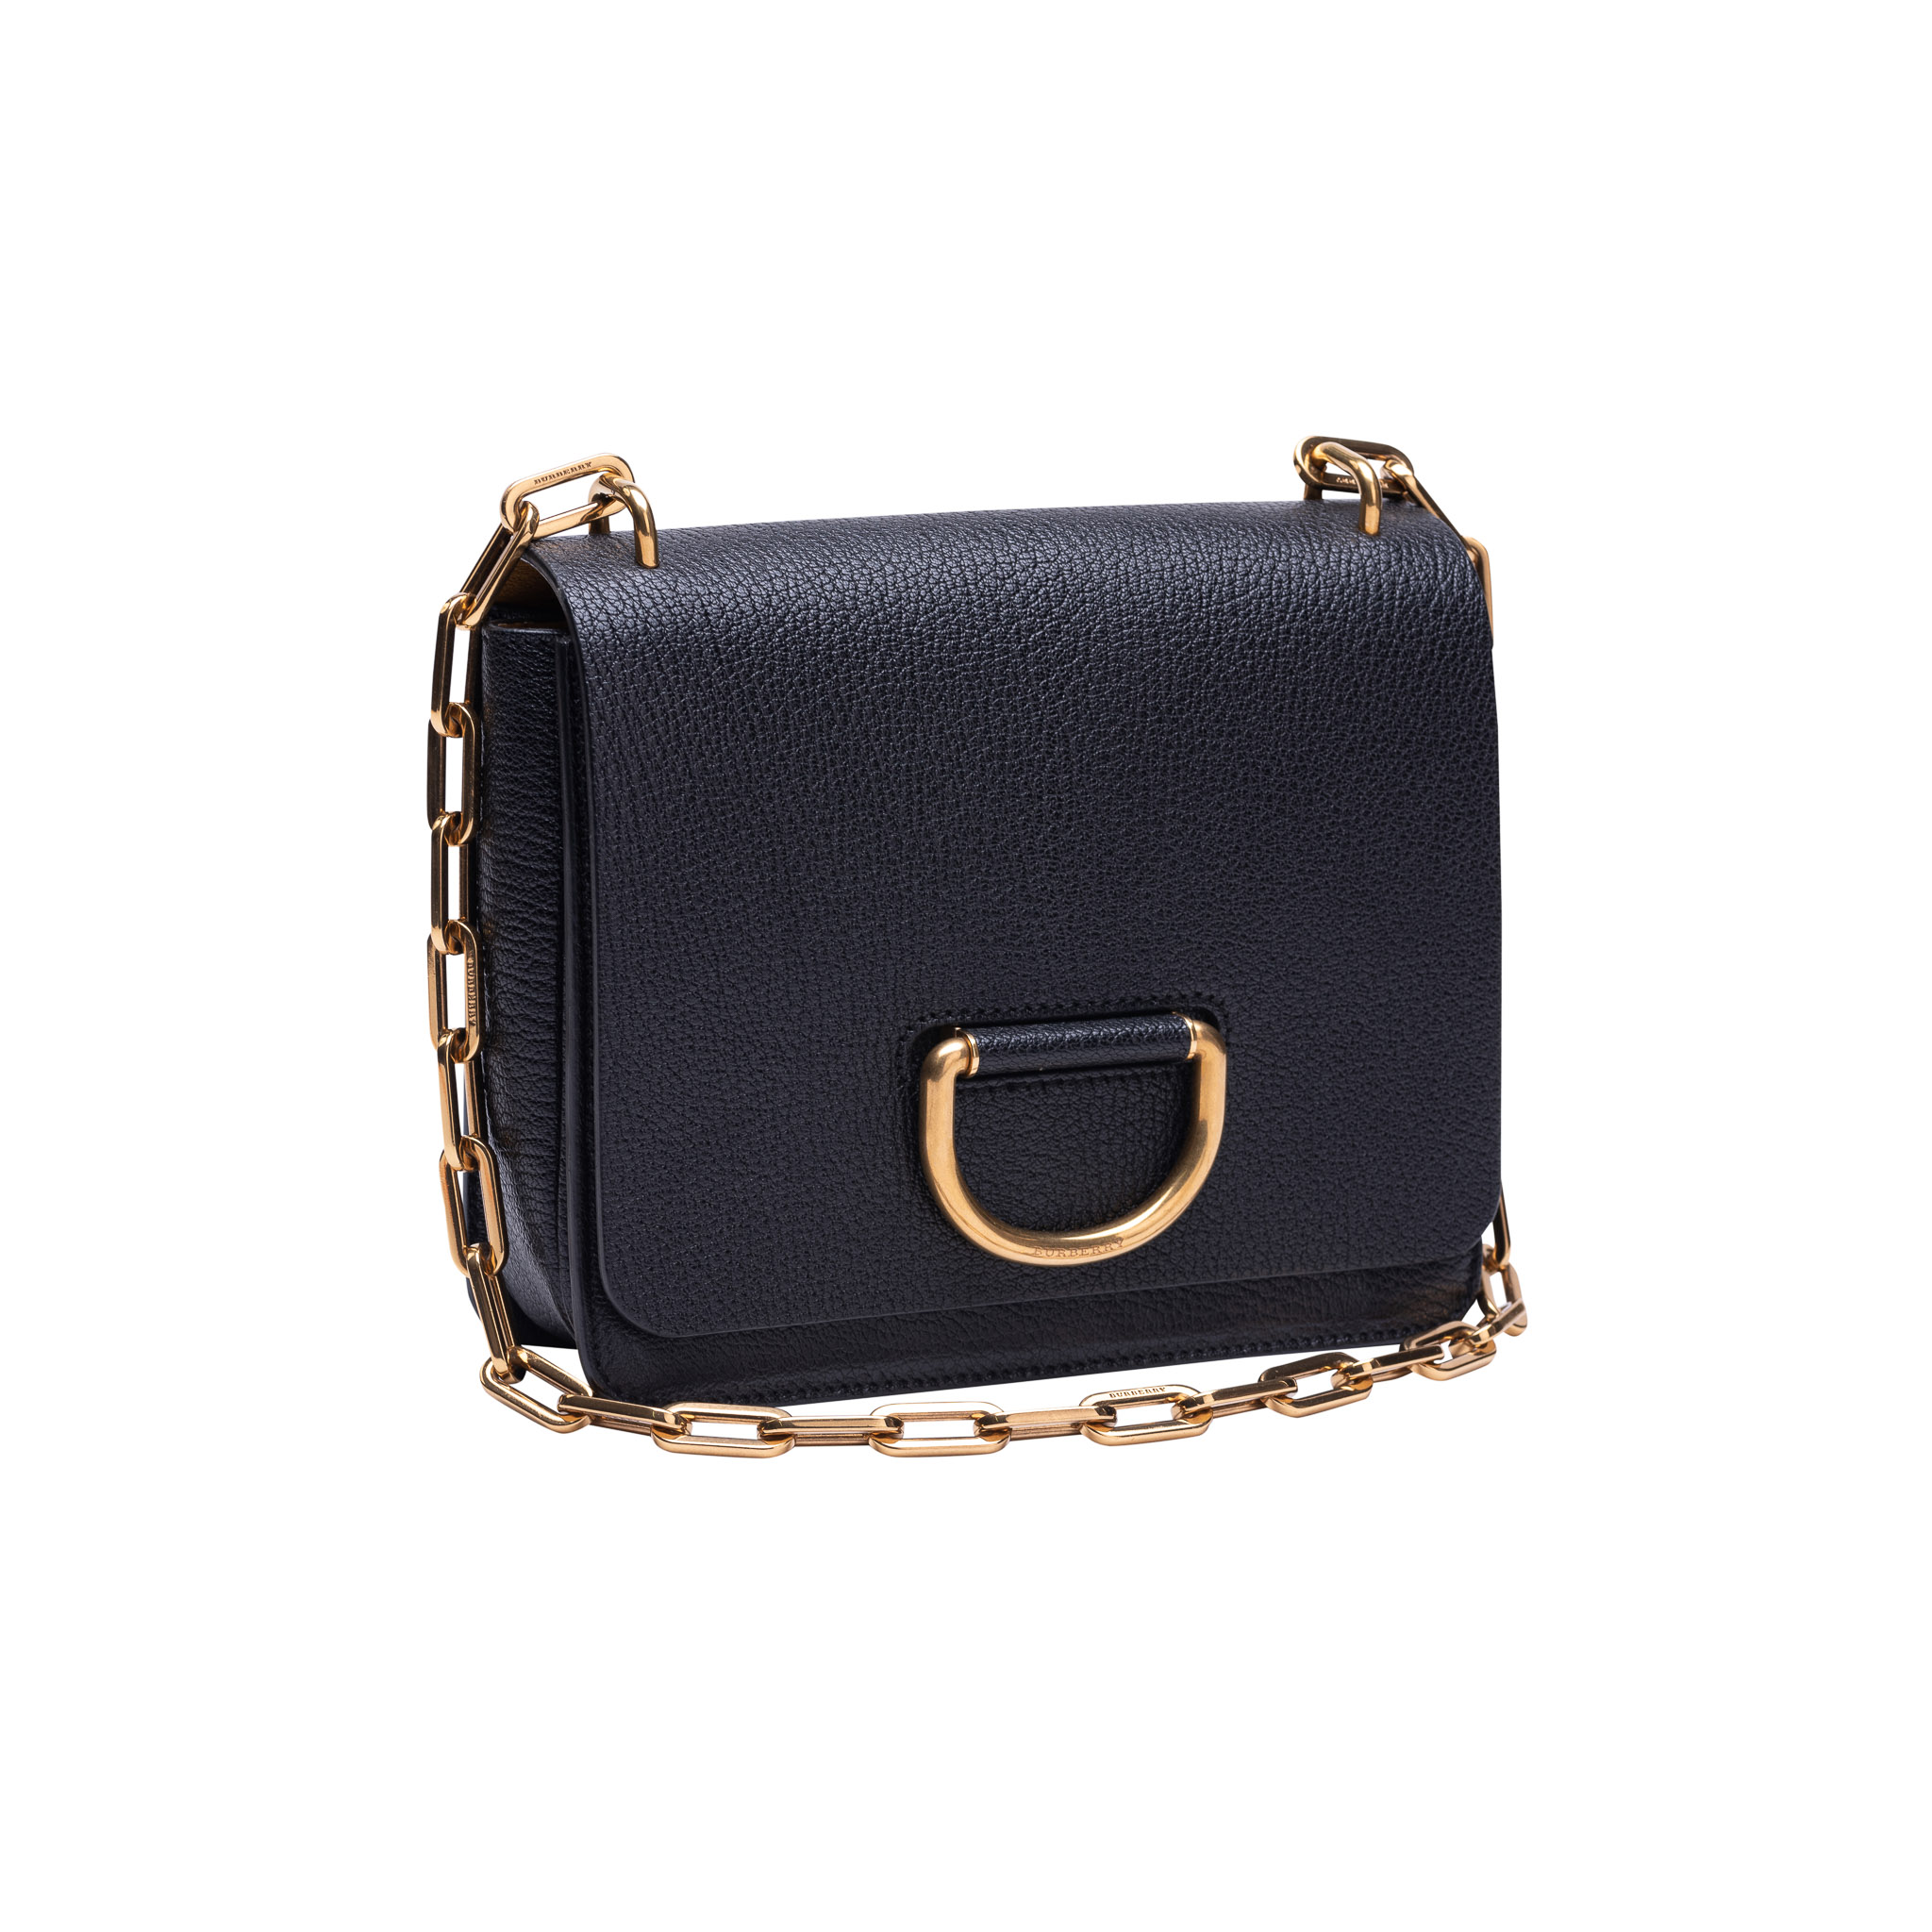 Designer Wax Genuine Leather Messenger Black Leather Shoulder Bag With Chain  Strap 28cm Large Womens Handbag For Crossbody Or Small Purse From  Fashionbag9988, $41.45 | DHgate.Com